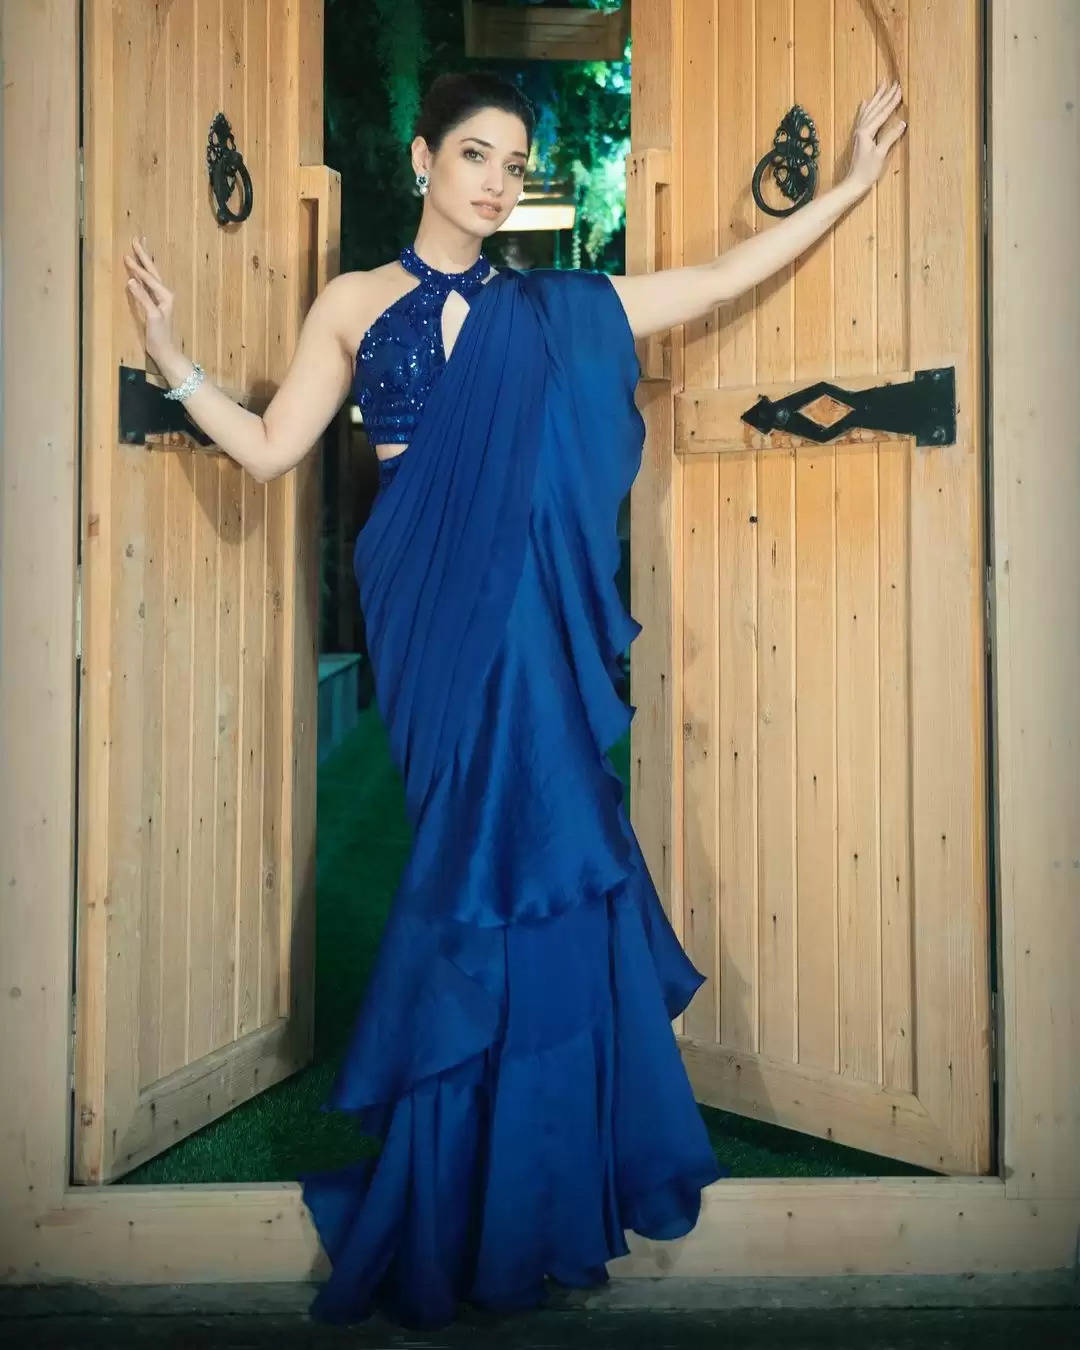  Photos: Tamannaah Bhatia Oozes Oomph In Bright Blue Dress, See Her Hot Looks